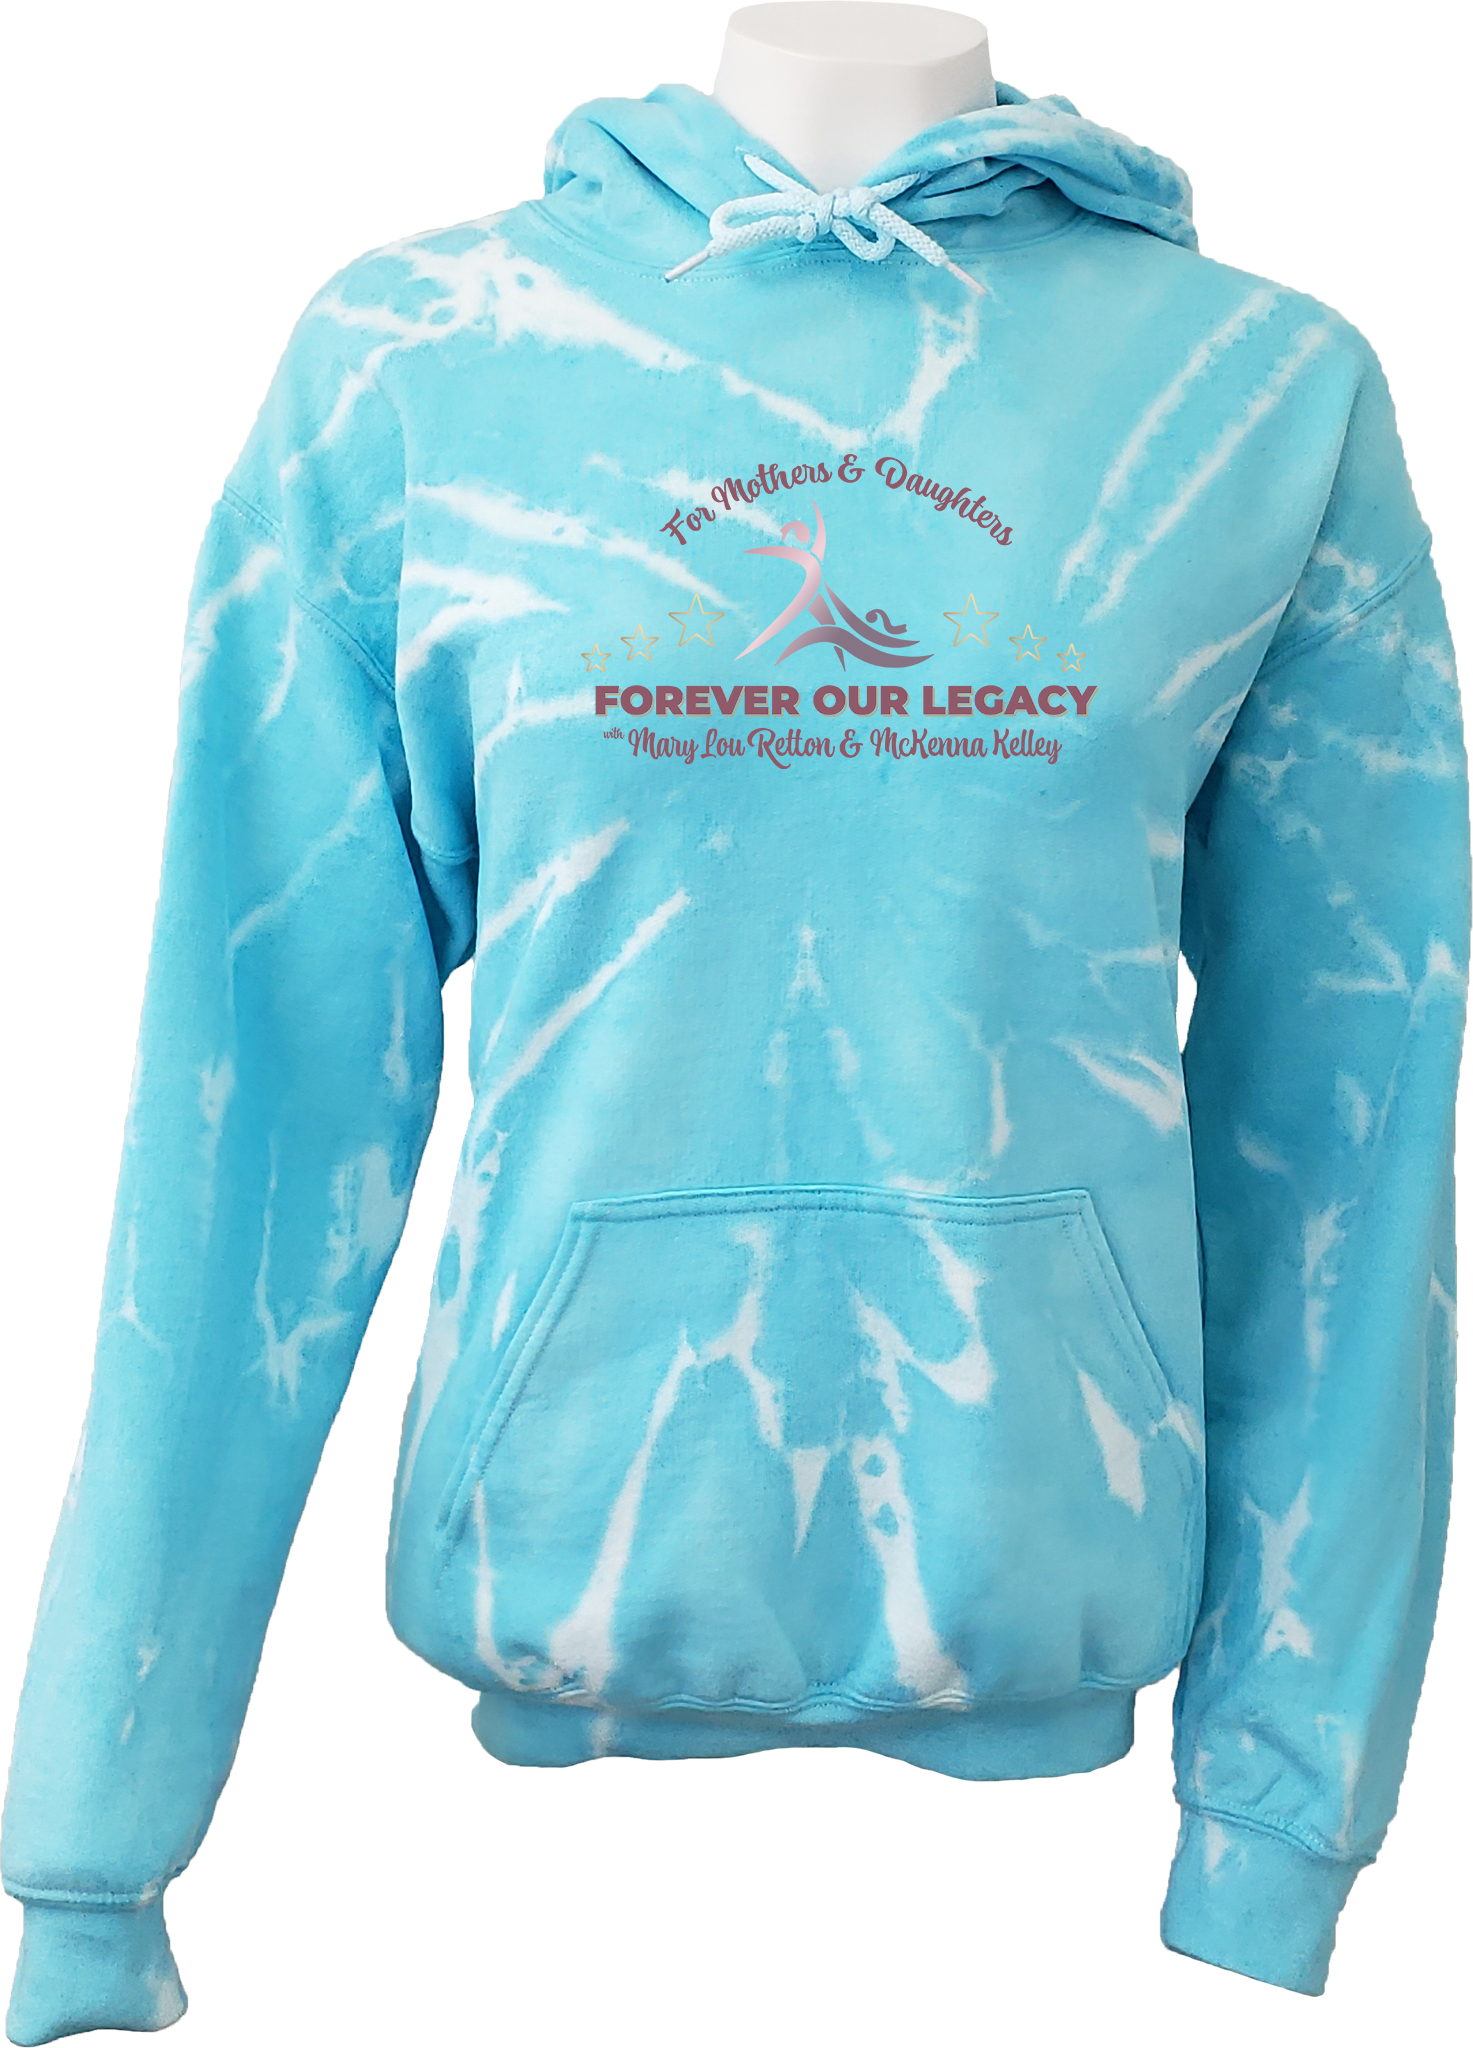 TIE-DYE HOODIES - 2023 For Mothers & Daughters Forever Our Legacy with Mary Lou Retton and Mckenna Kelley